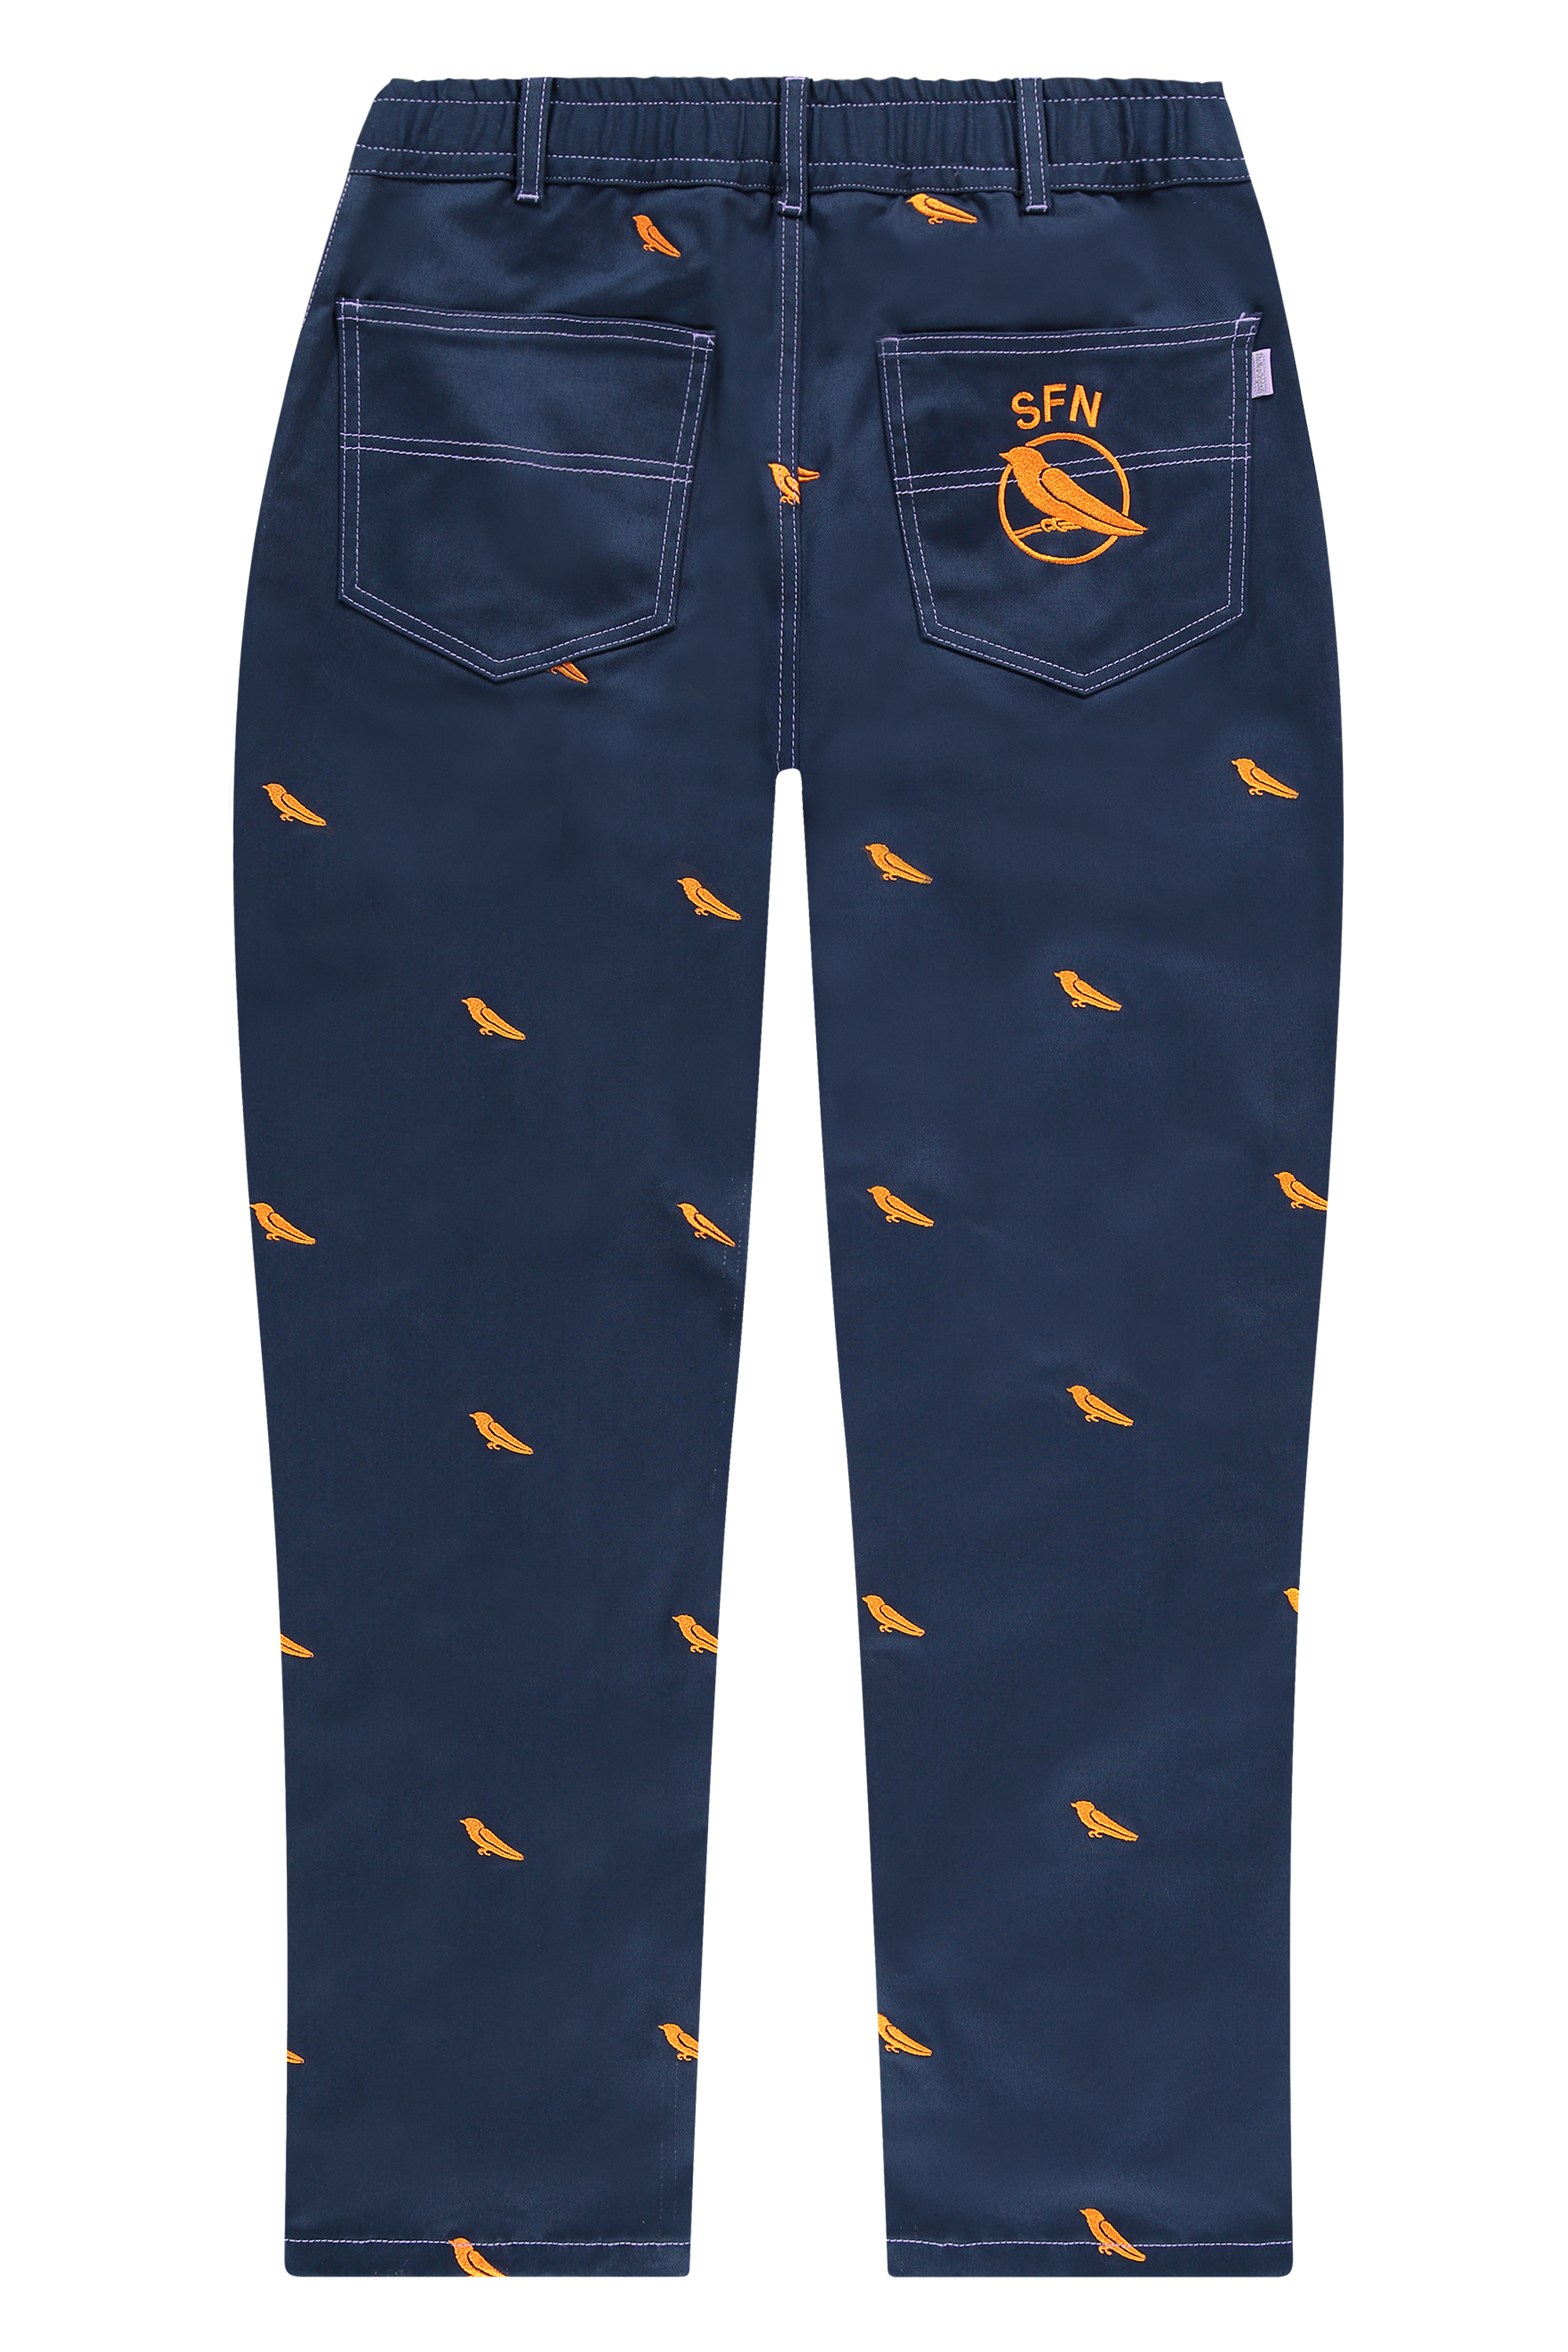 products-olympictrouser_navy_back-png